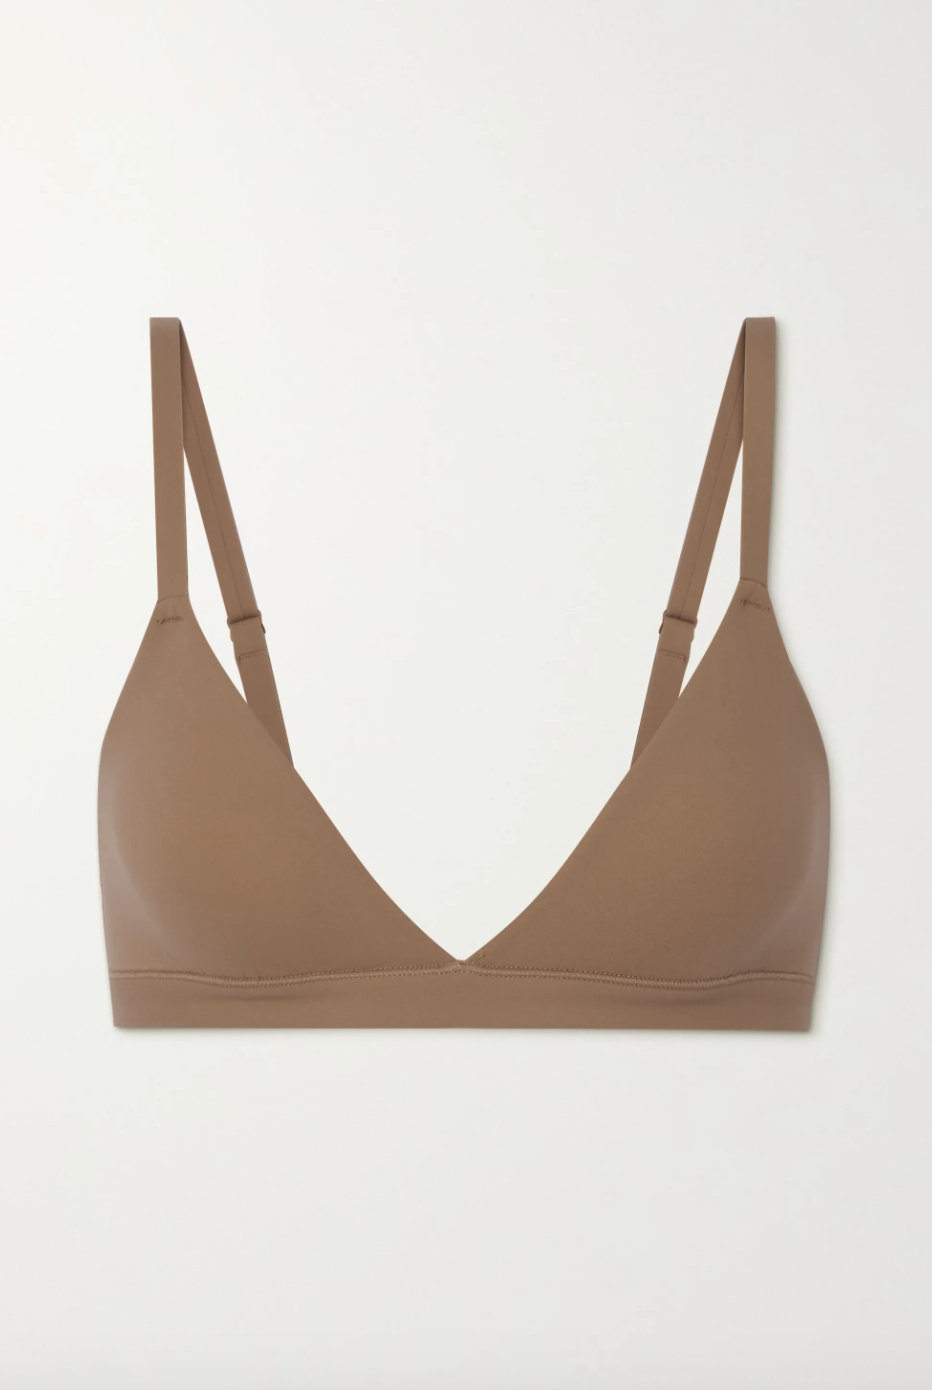 bralettes that are identical to the Skim's plunge bralette